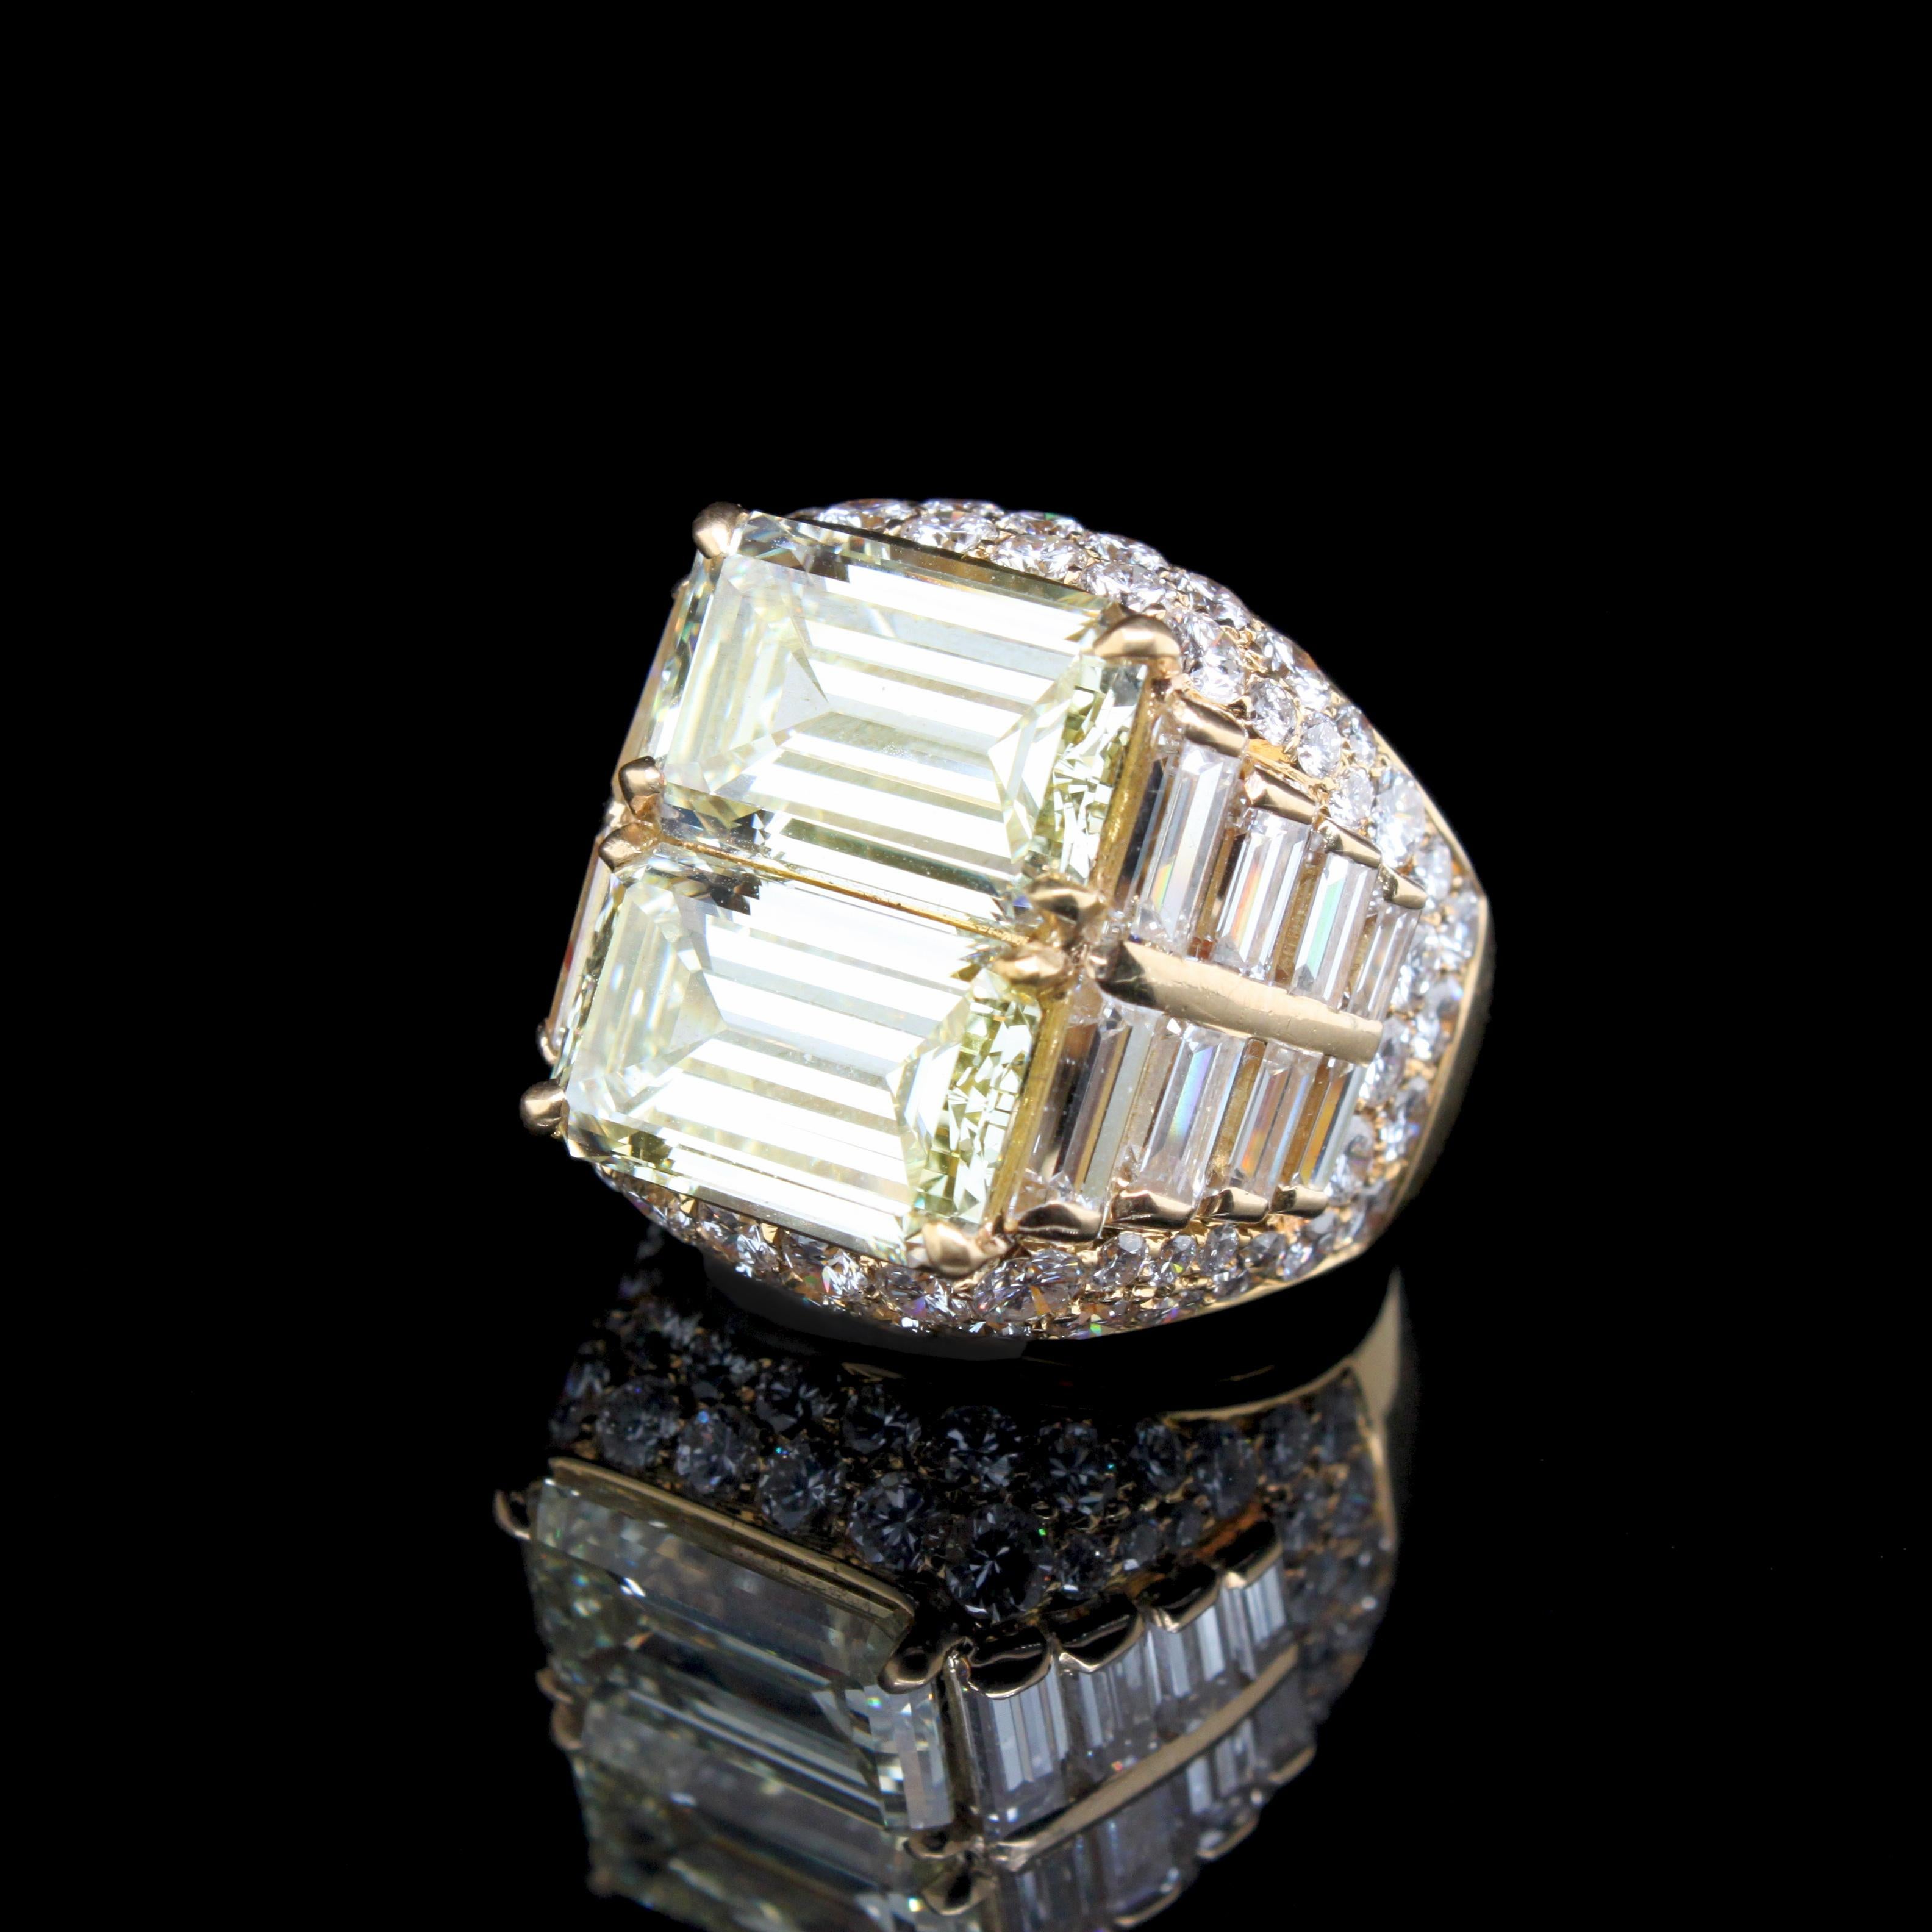 Important Bulgari Diamond Trombino Ring, ca. 1970s

The Bulgari Trombino double diamond ring centres two beautifully aligned and parallel-set light yellow emerald cut diamonds of 10.16 carats together (5.30 and 4.86 carats). Further accented by